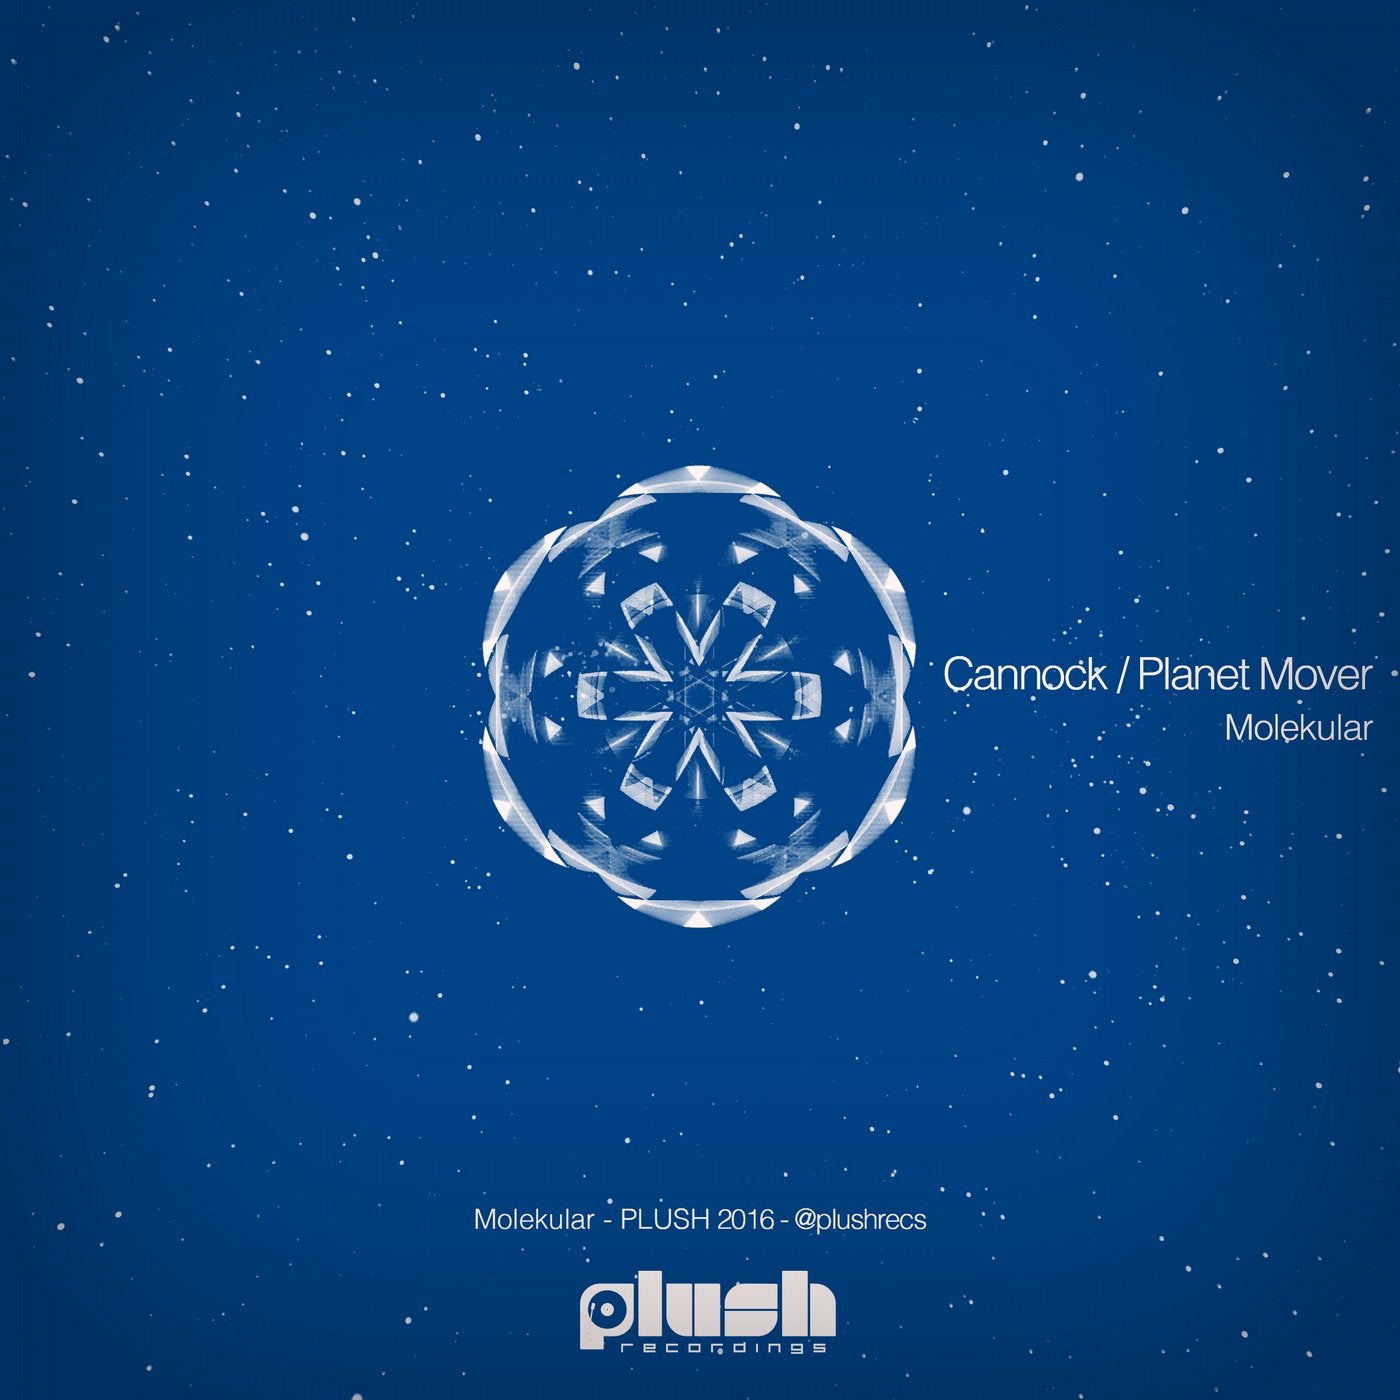 Cannock / Planet Mover